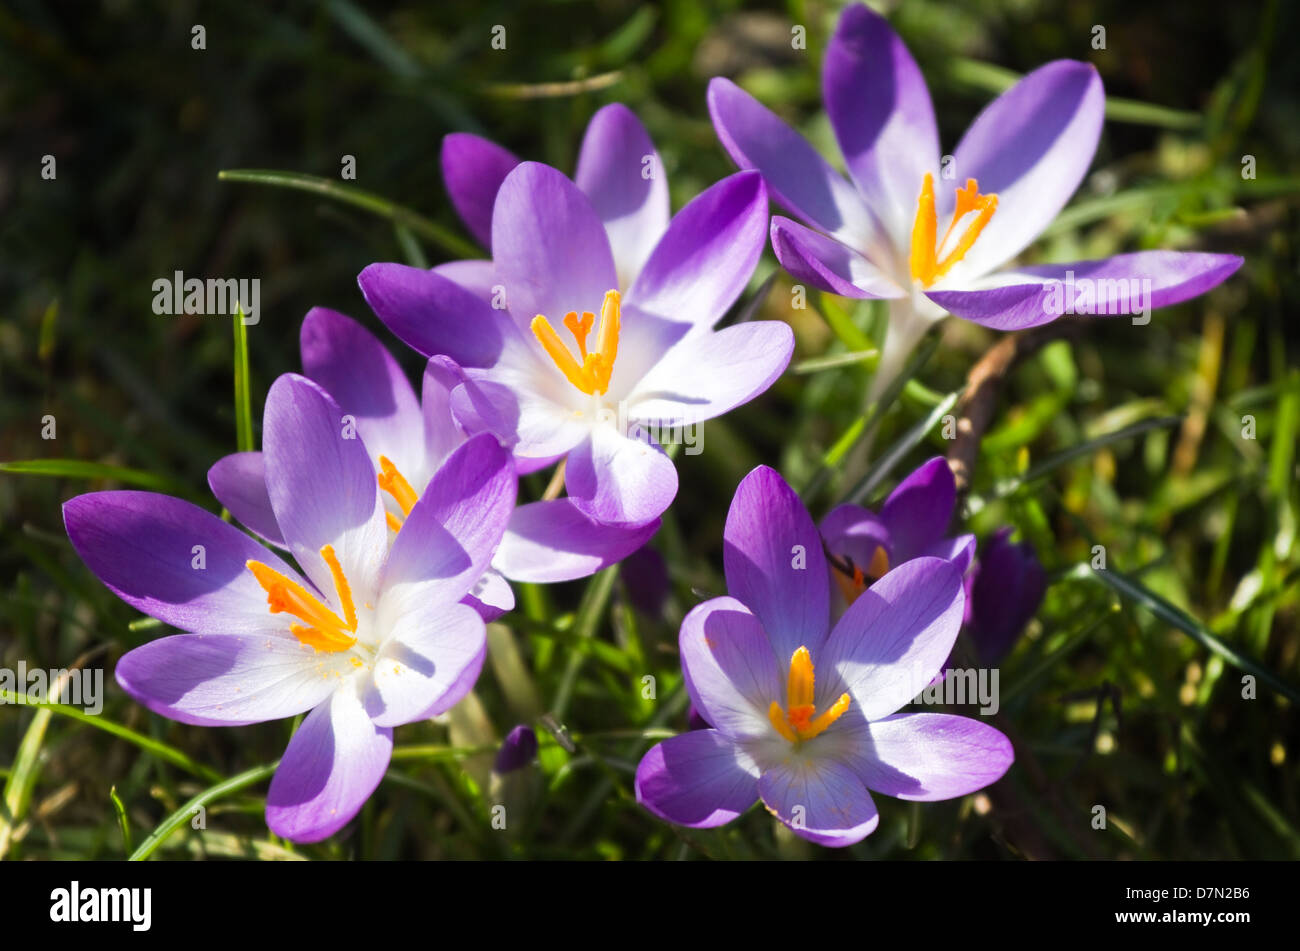 Purple spring crocus or Crocus vernus on a sunny day in March Stock Photo